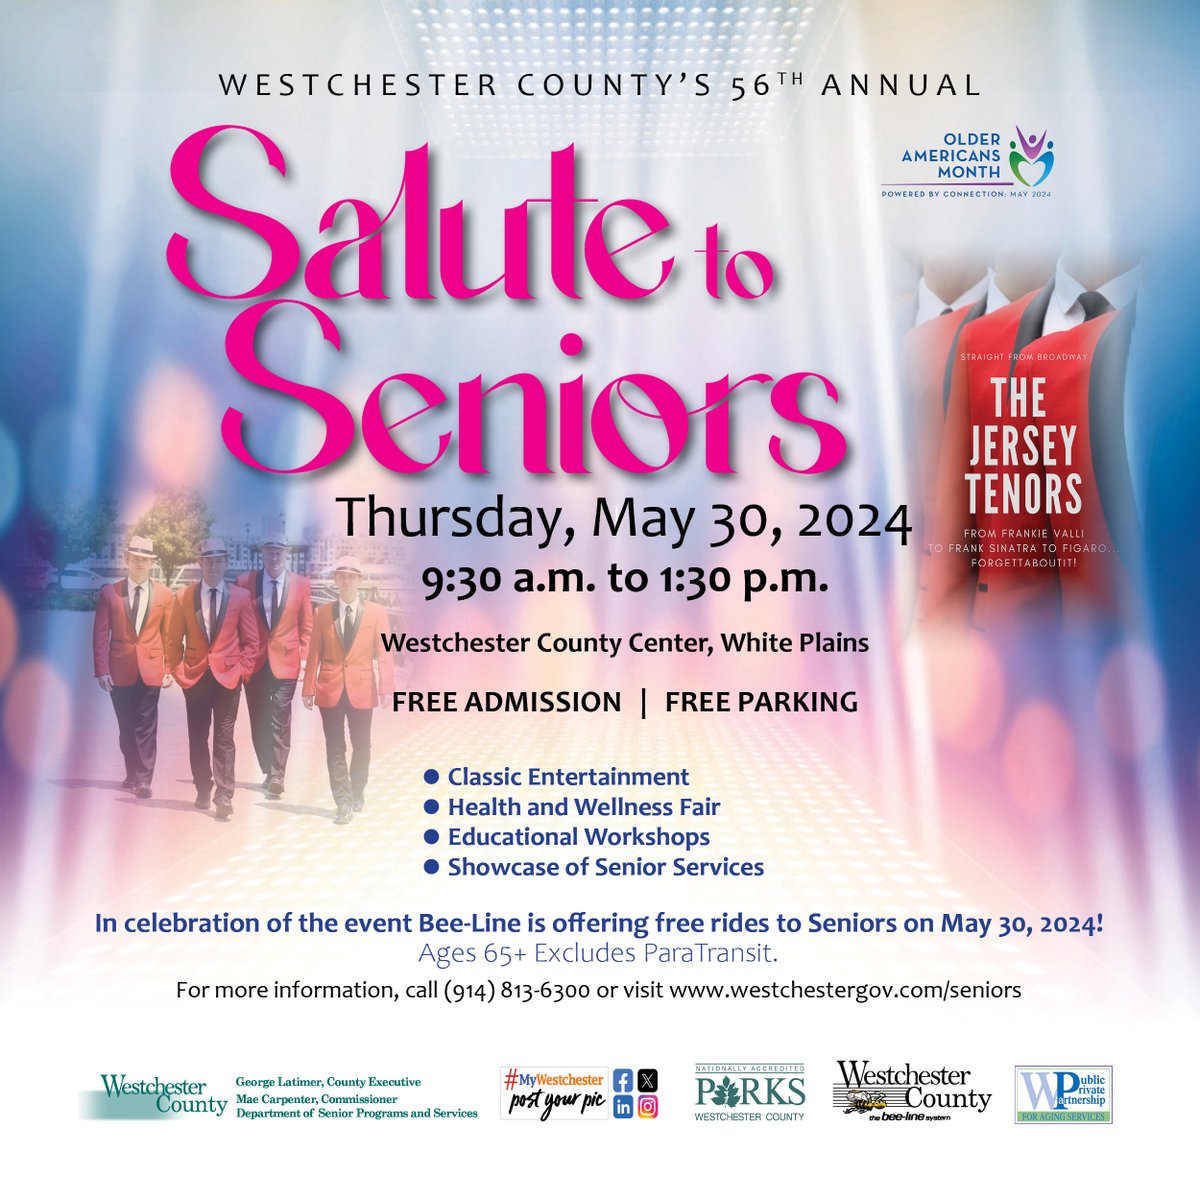 In celebration of Older Americans Month, Westchester County is holding its 56th Annual Salute to Seniors event at the Westchester County Center on Thursday, May 30, 2024, from 9:30 am to 1:30 pm. Read more here: ow.ly/wAEv50RflBs